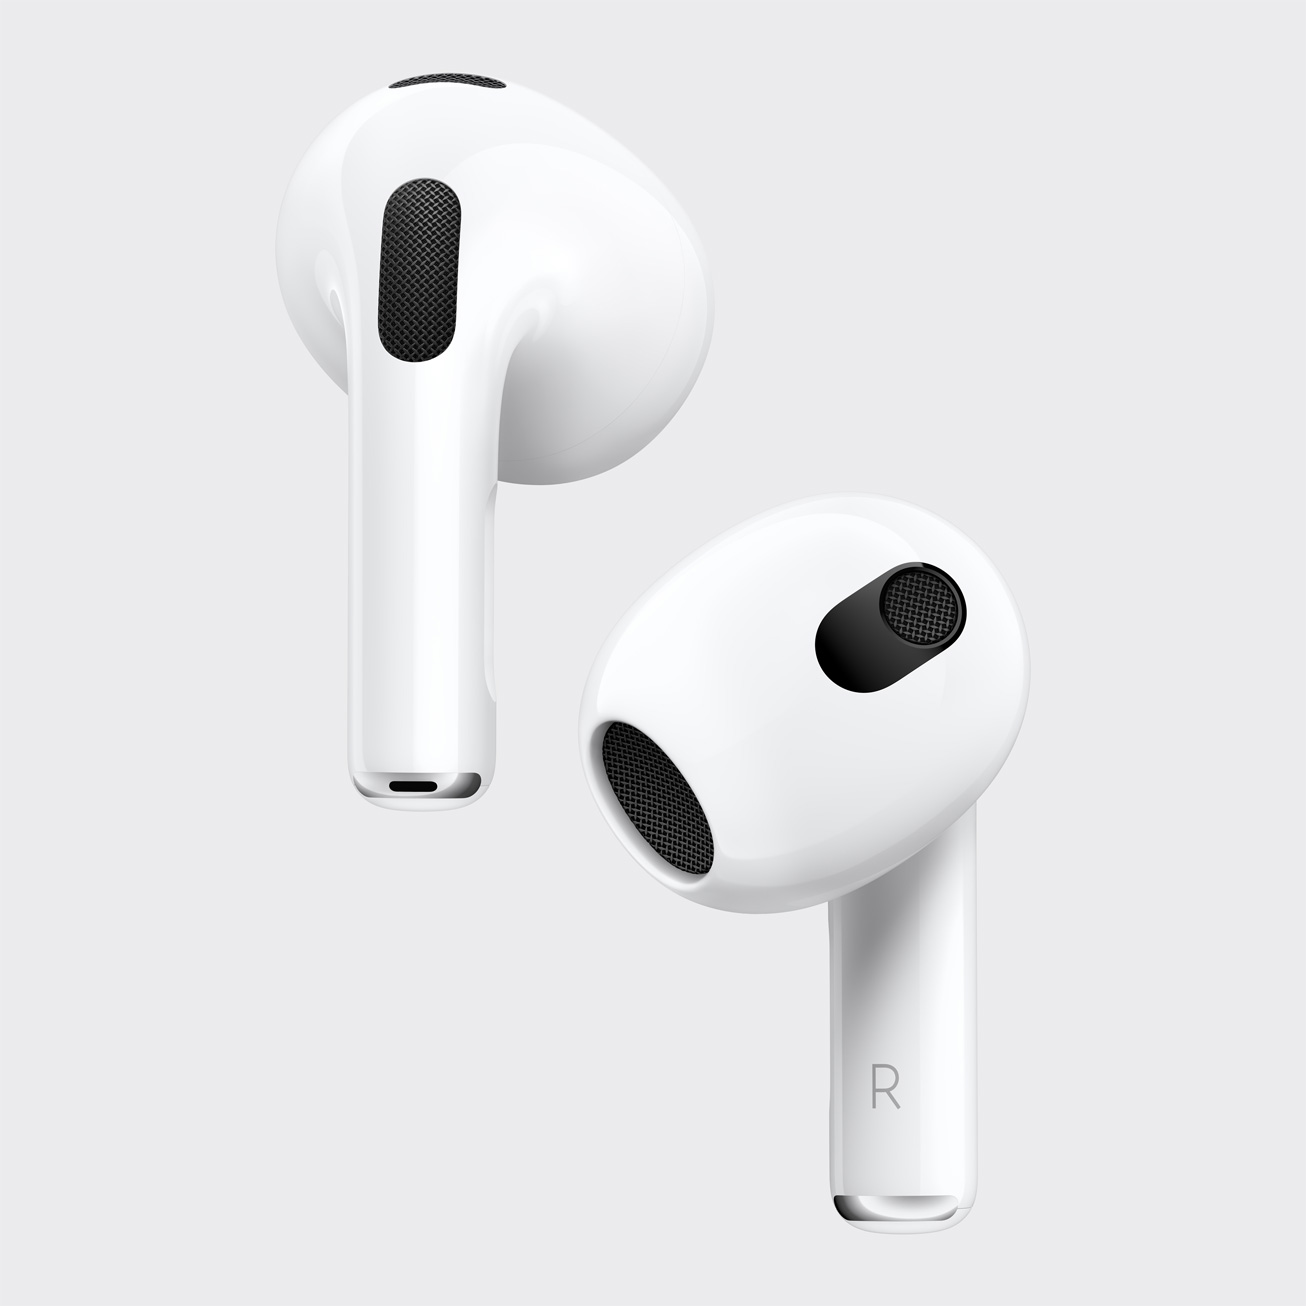 Rosefarve elev spejder FAQ | Is It a Good or Bad Time to Buy Apple AirPods Pro?